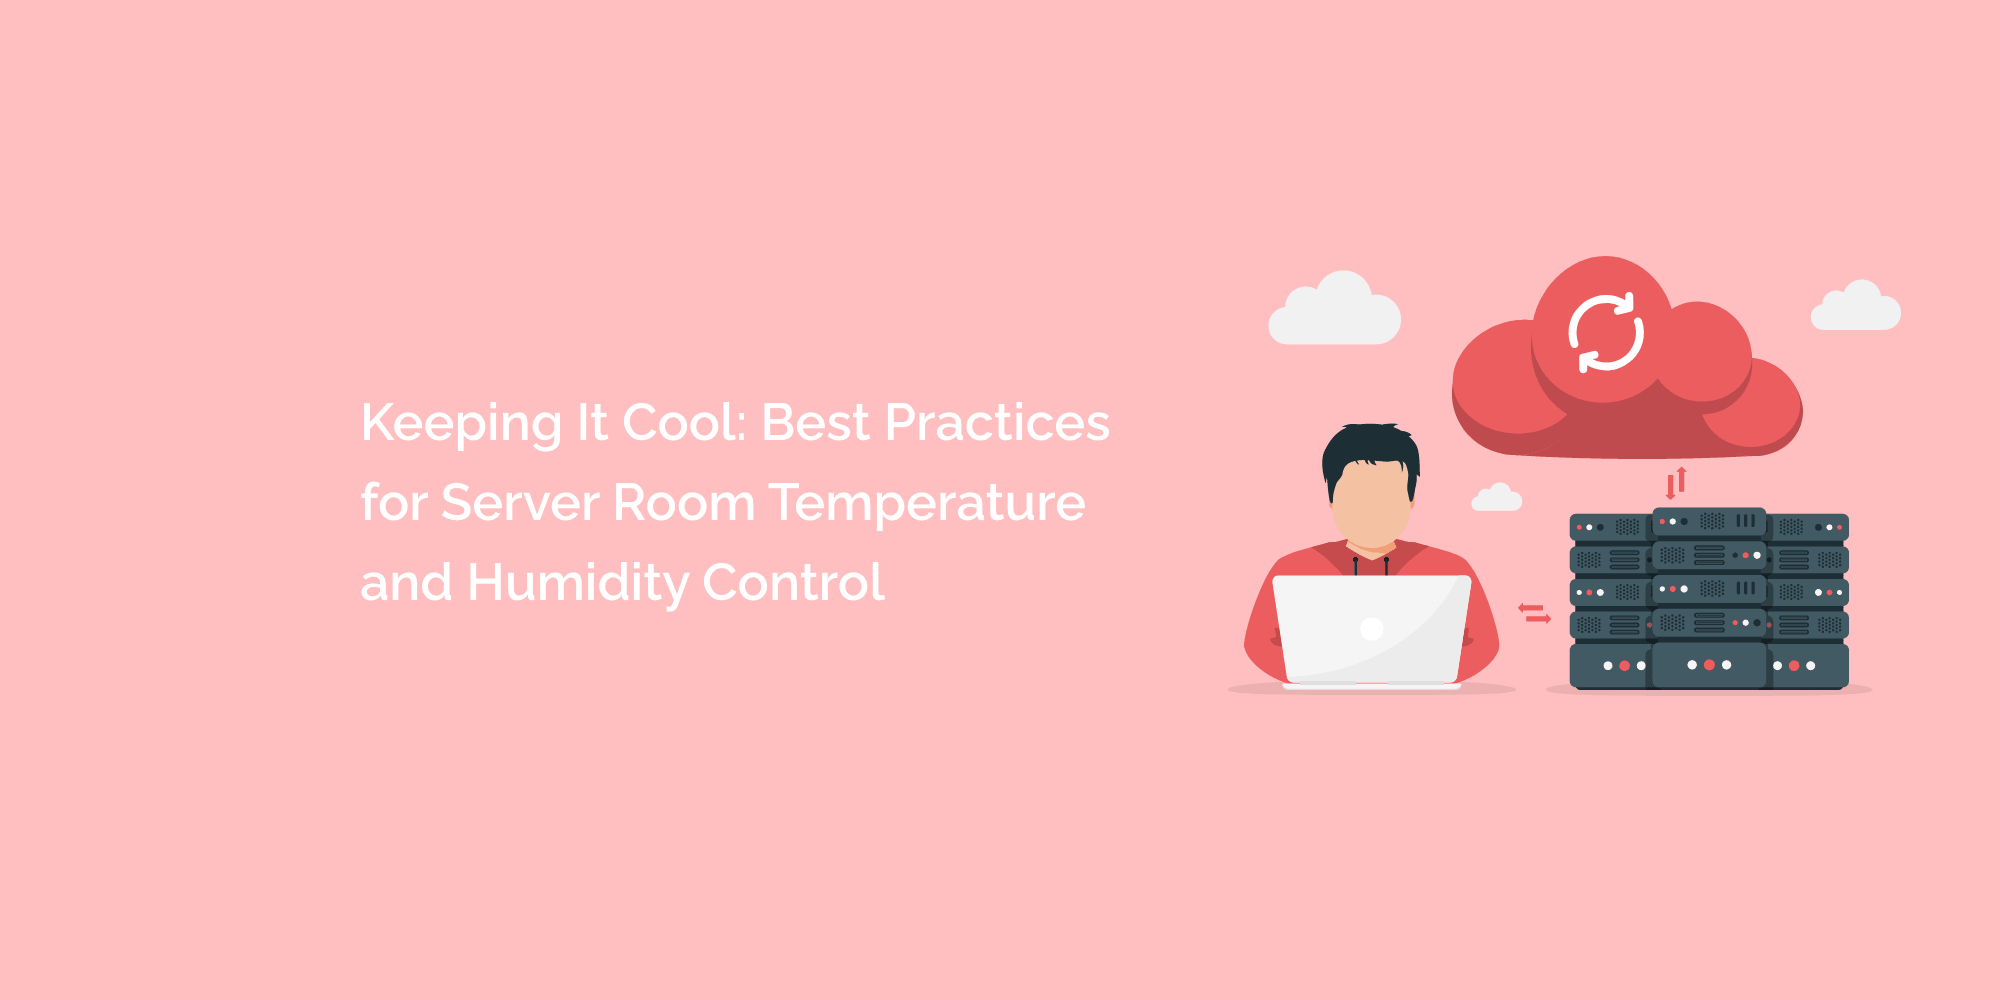 Keeping It Cool: Best Practices for Server Room Temperature and Humidity Control